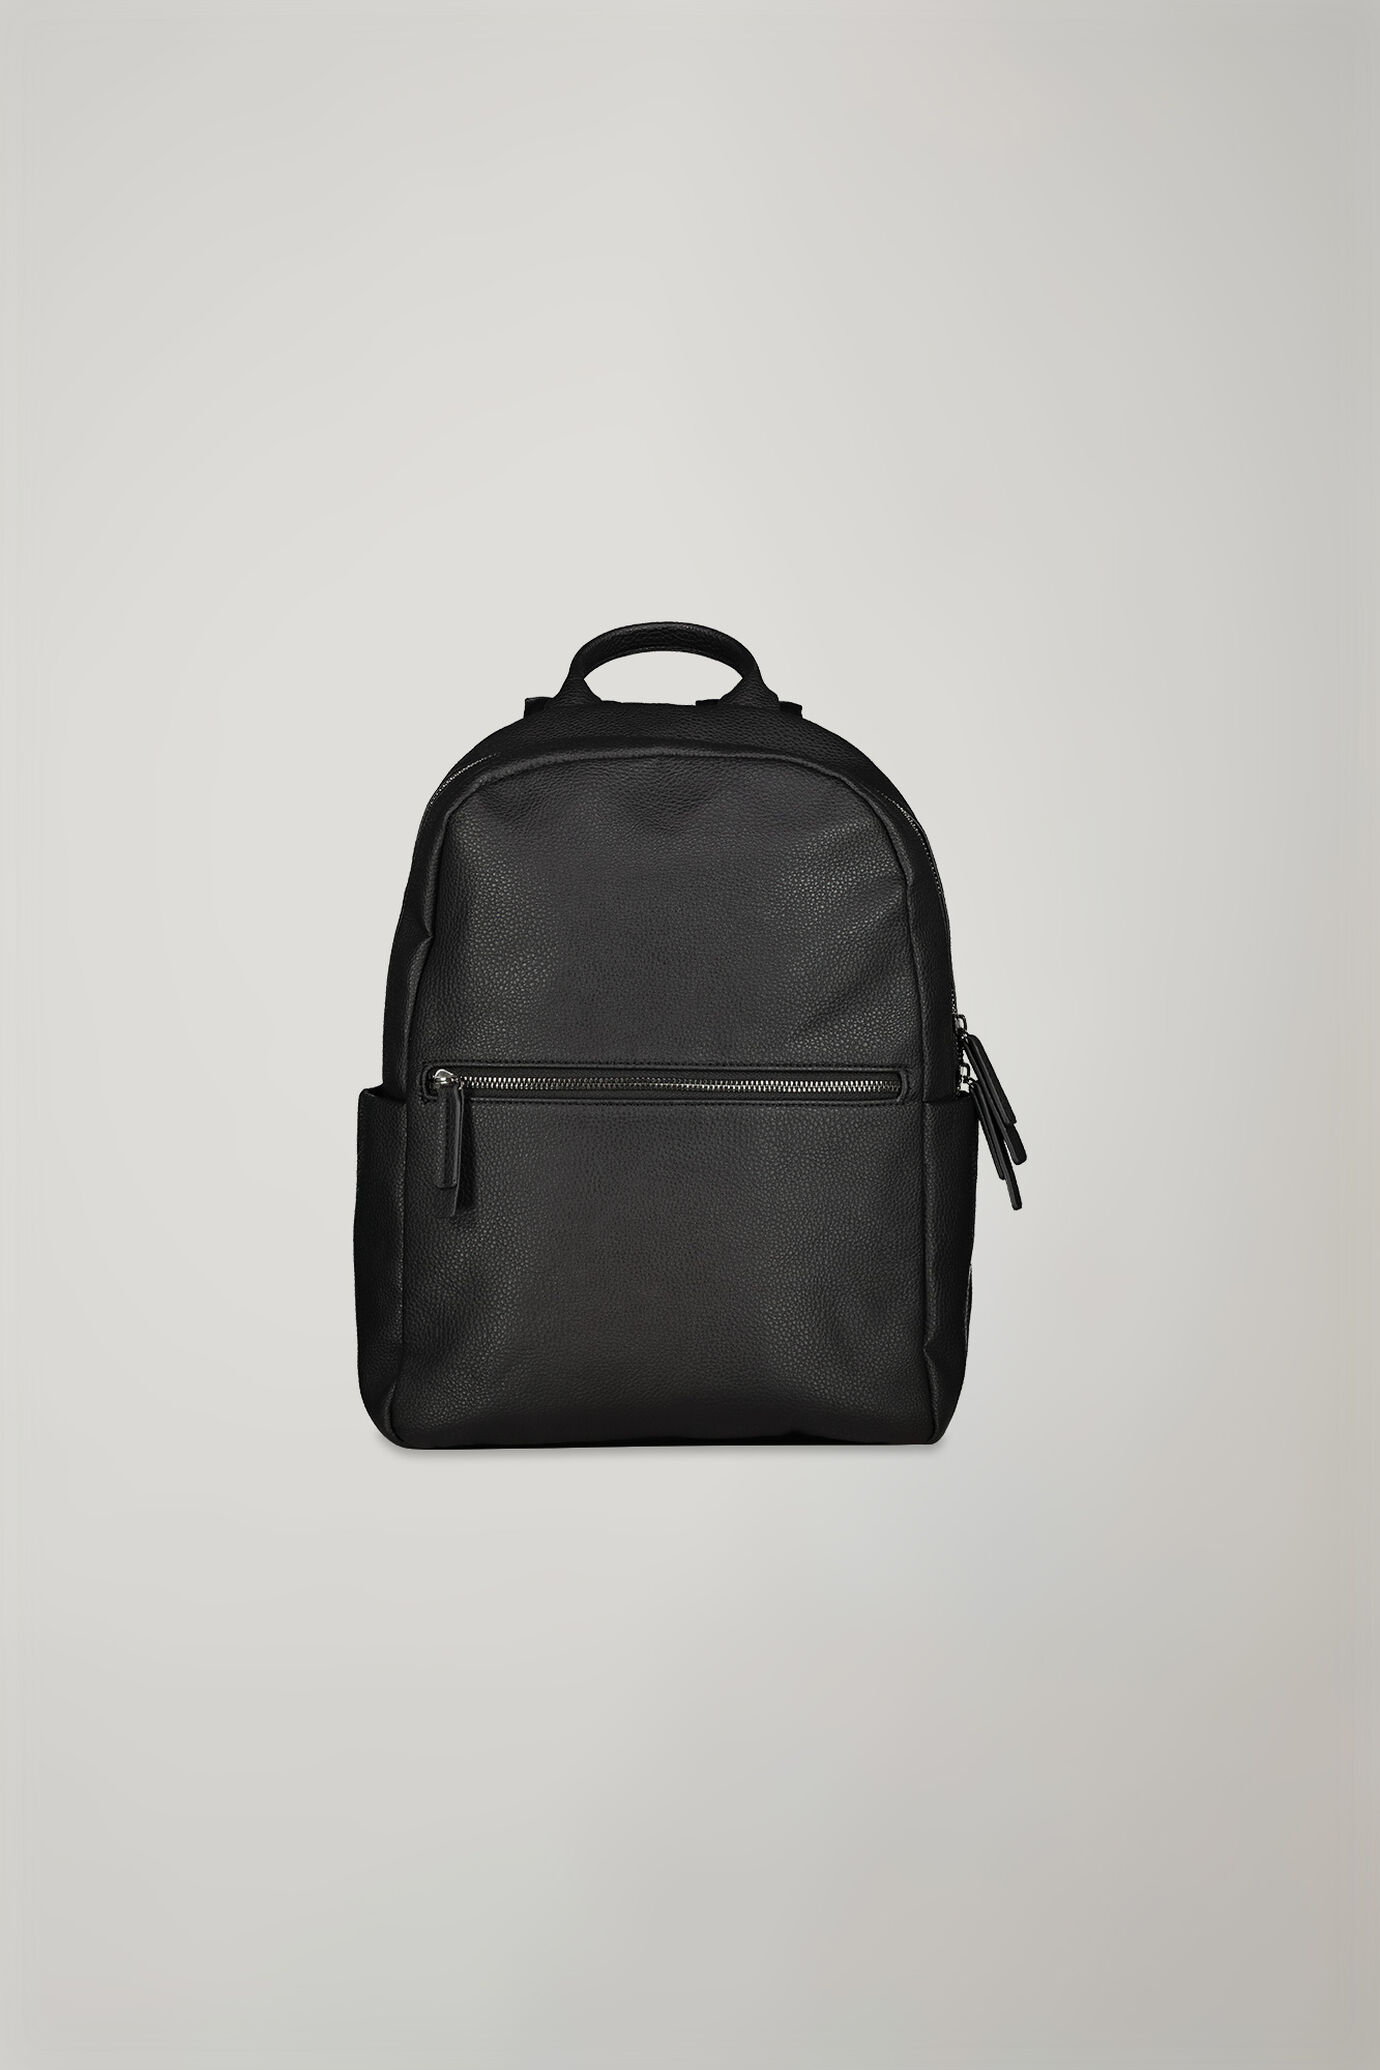 Men's backpack in imitation leather